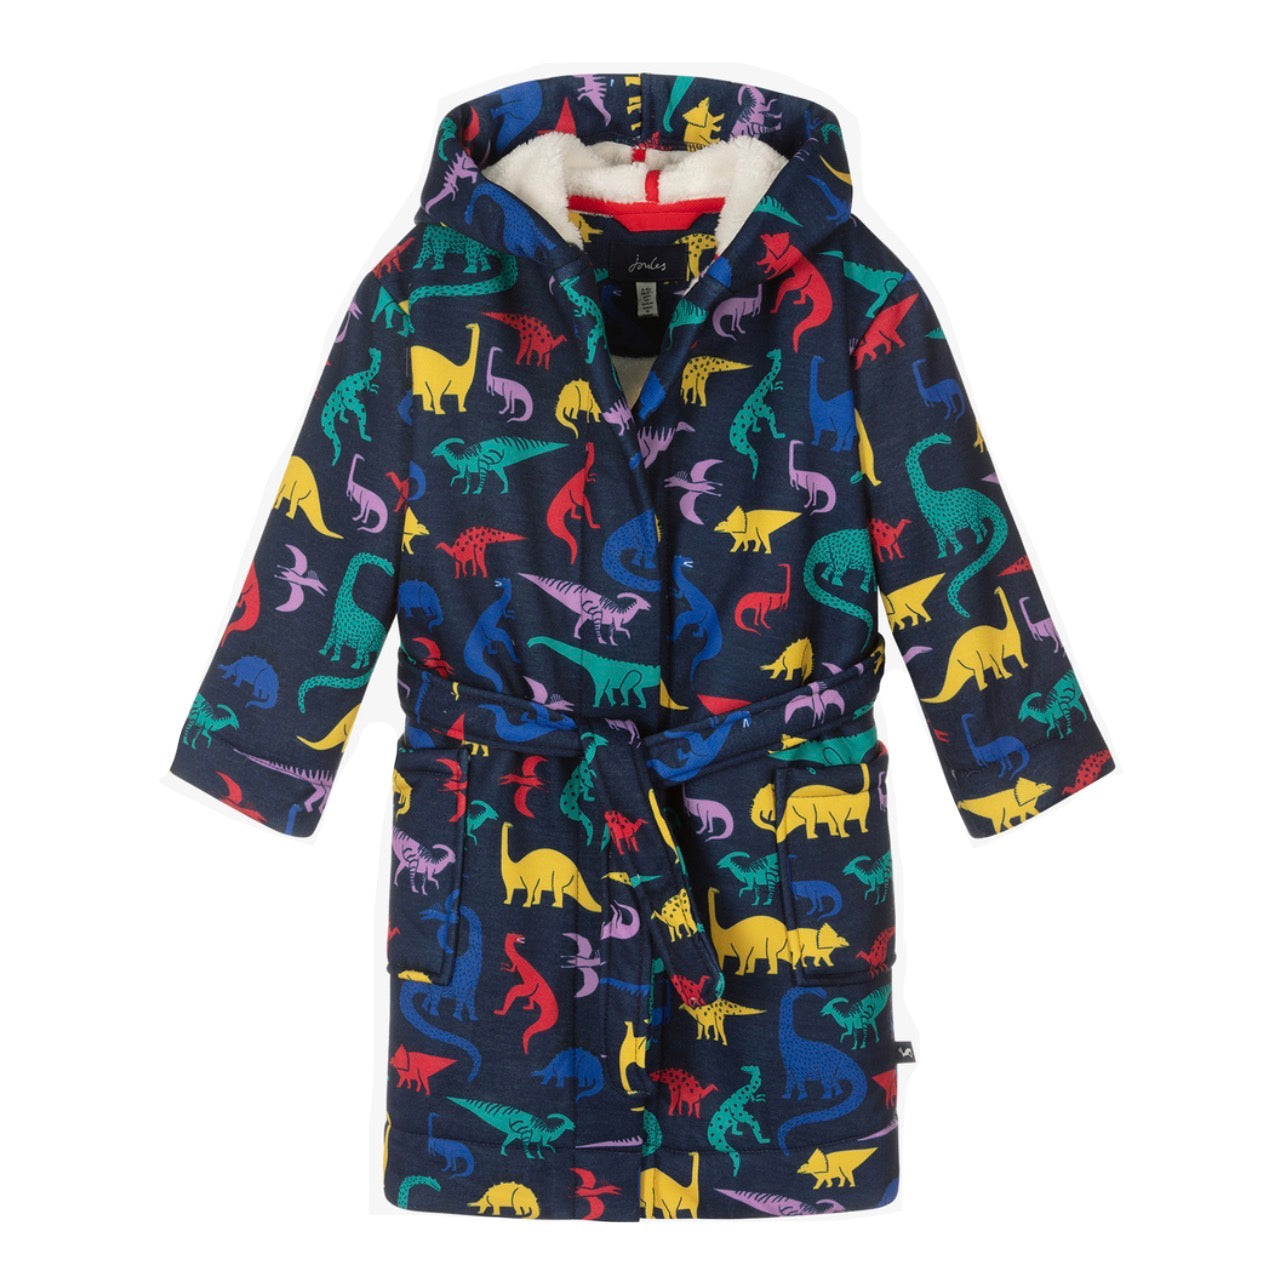 Joules Starlight Navy Dino Dressing Gown Clothing 3-4YRS / Navy,5-6YRS / Navy,7-8YRS / Navy,9-10YRS / Navy